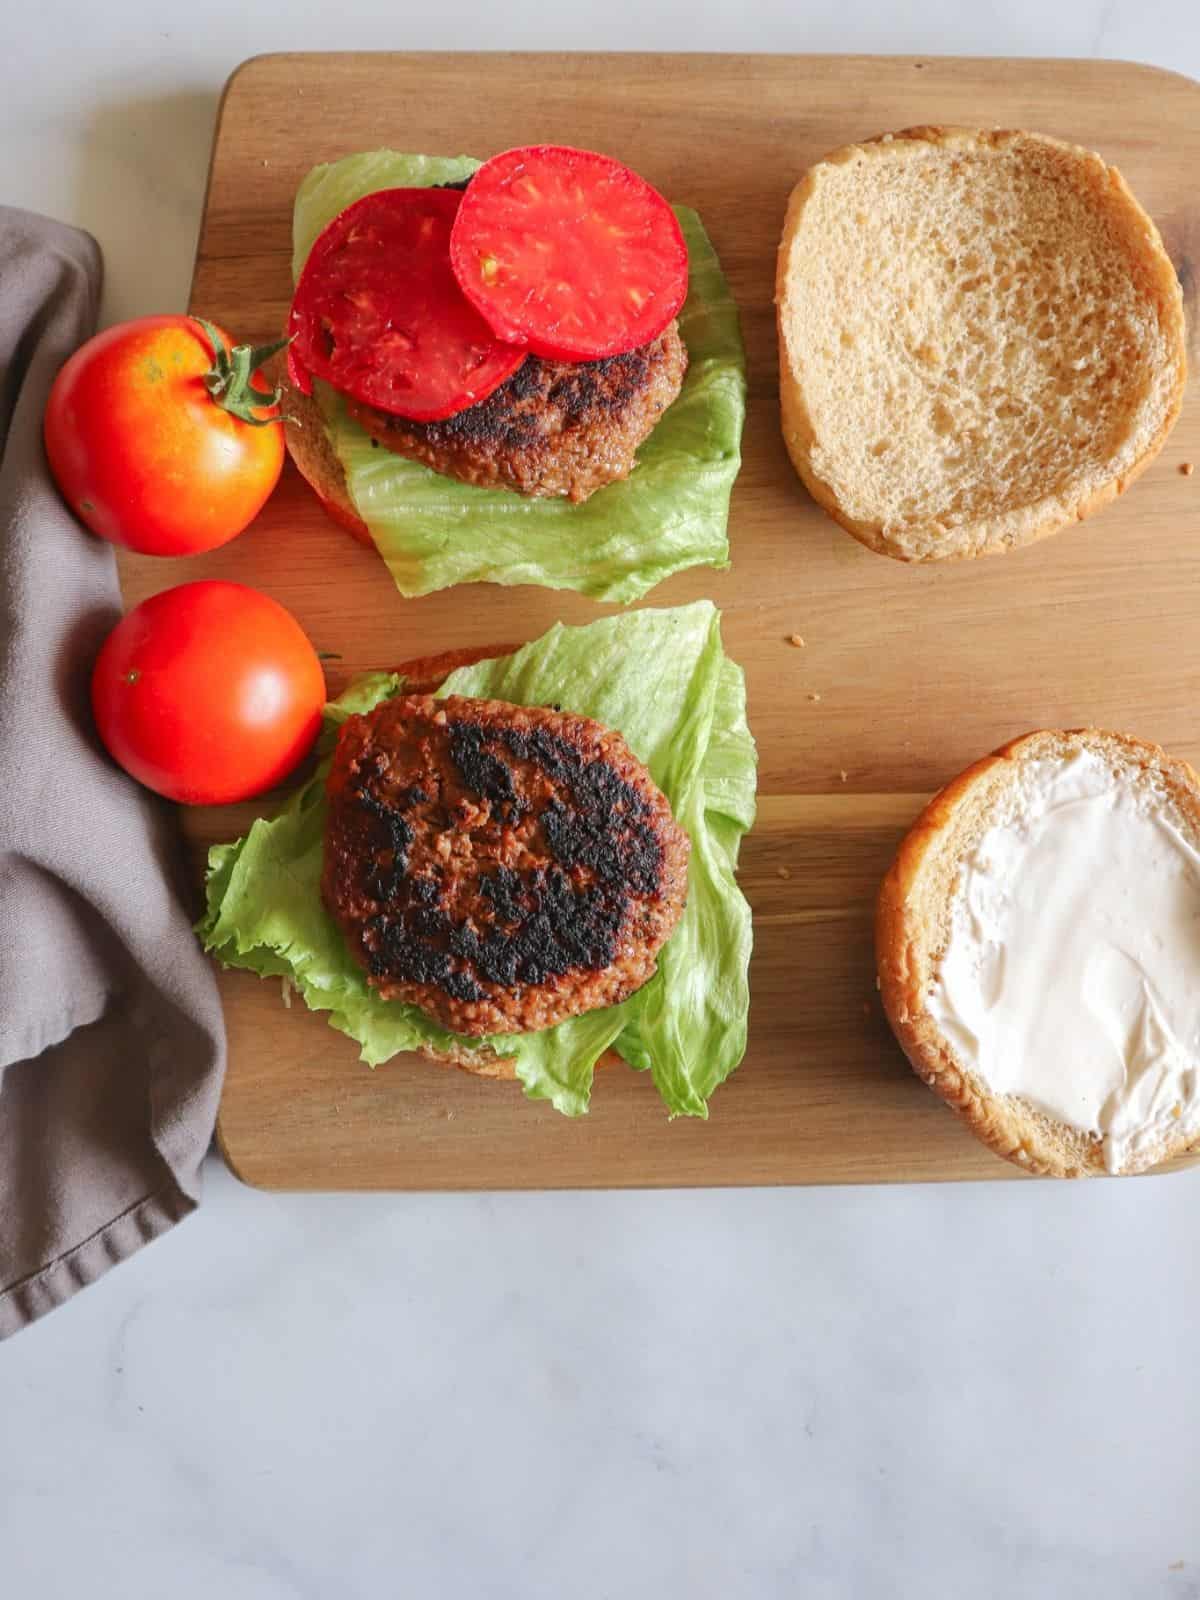 buns, tomatoes and lettuce on wooden surface